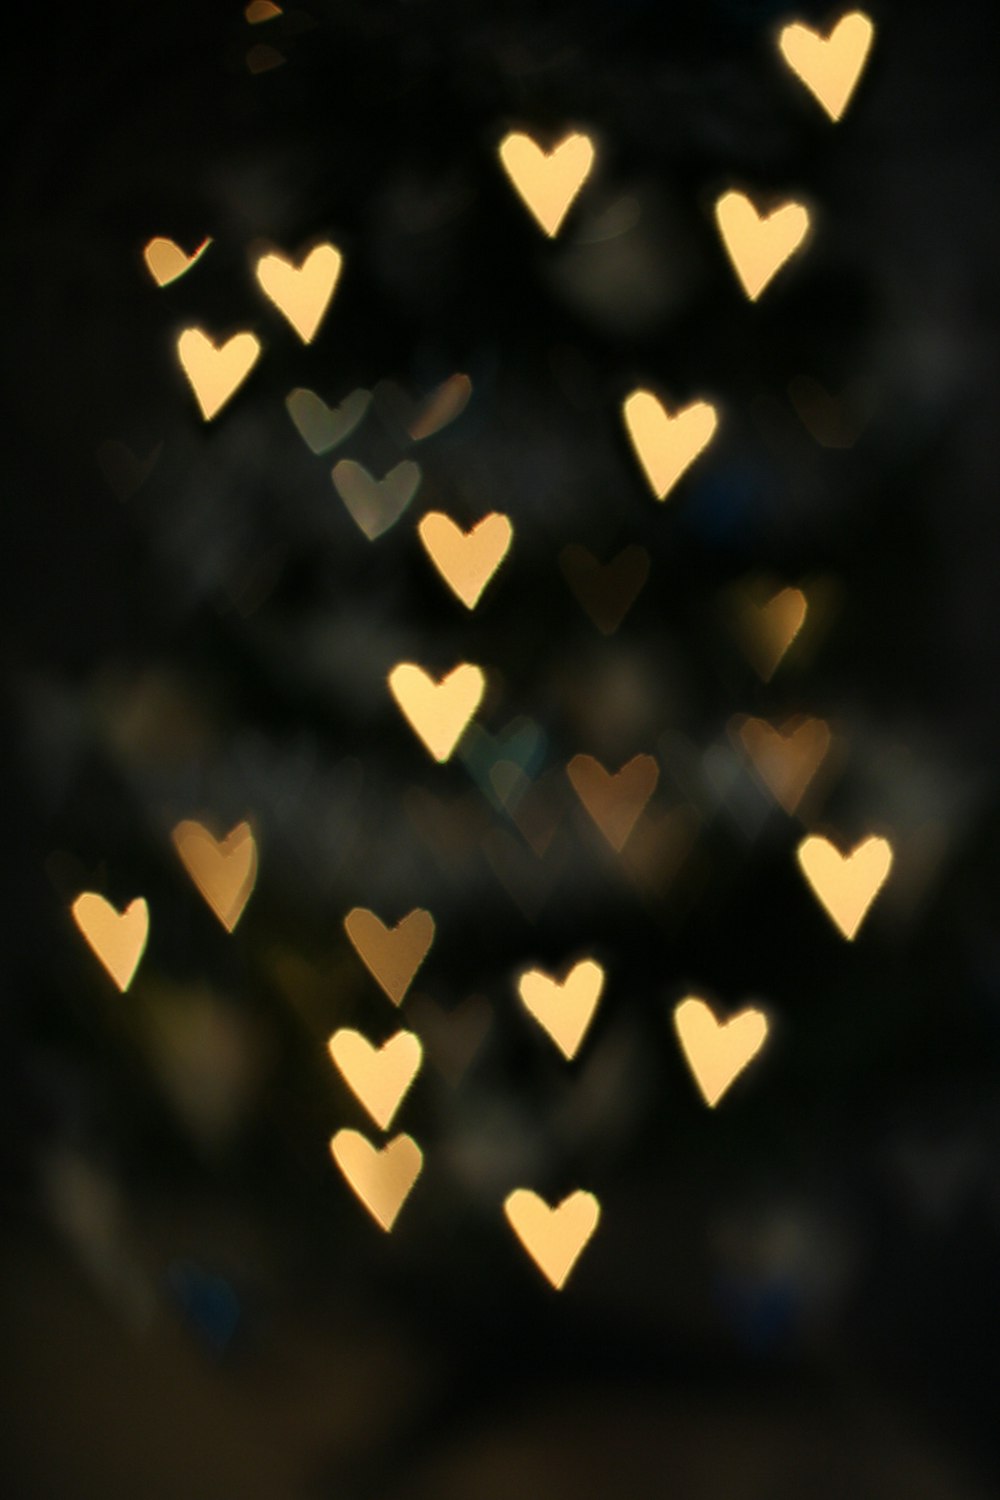 350+ Hearts Pictures  Download Free Images on Unsplash